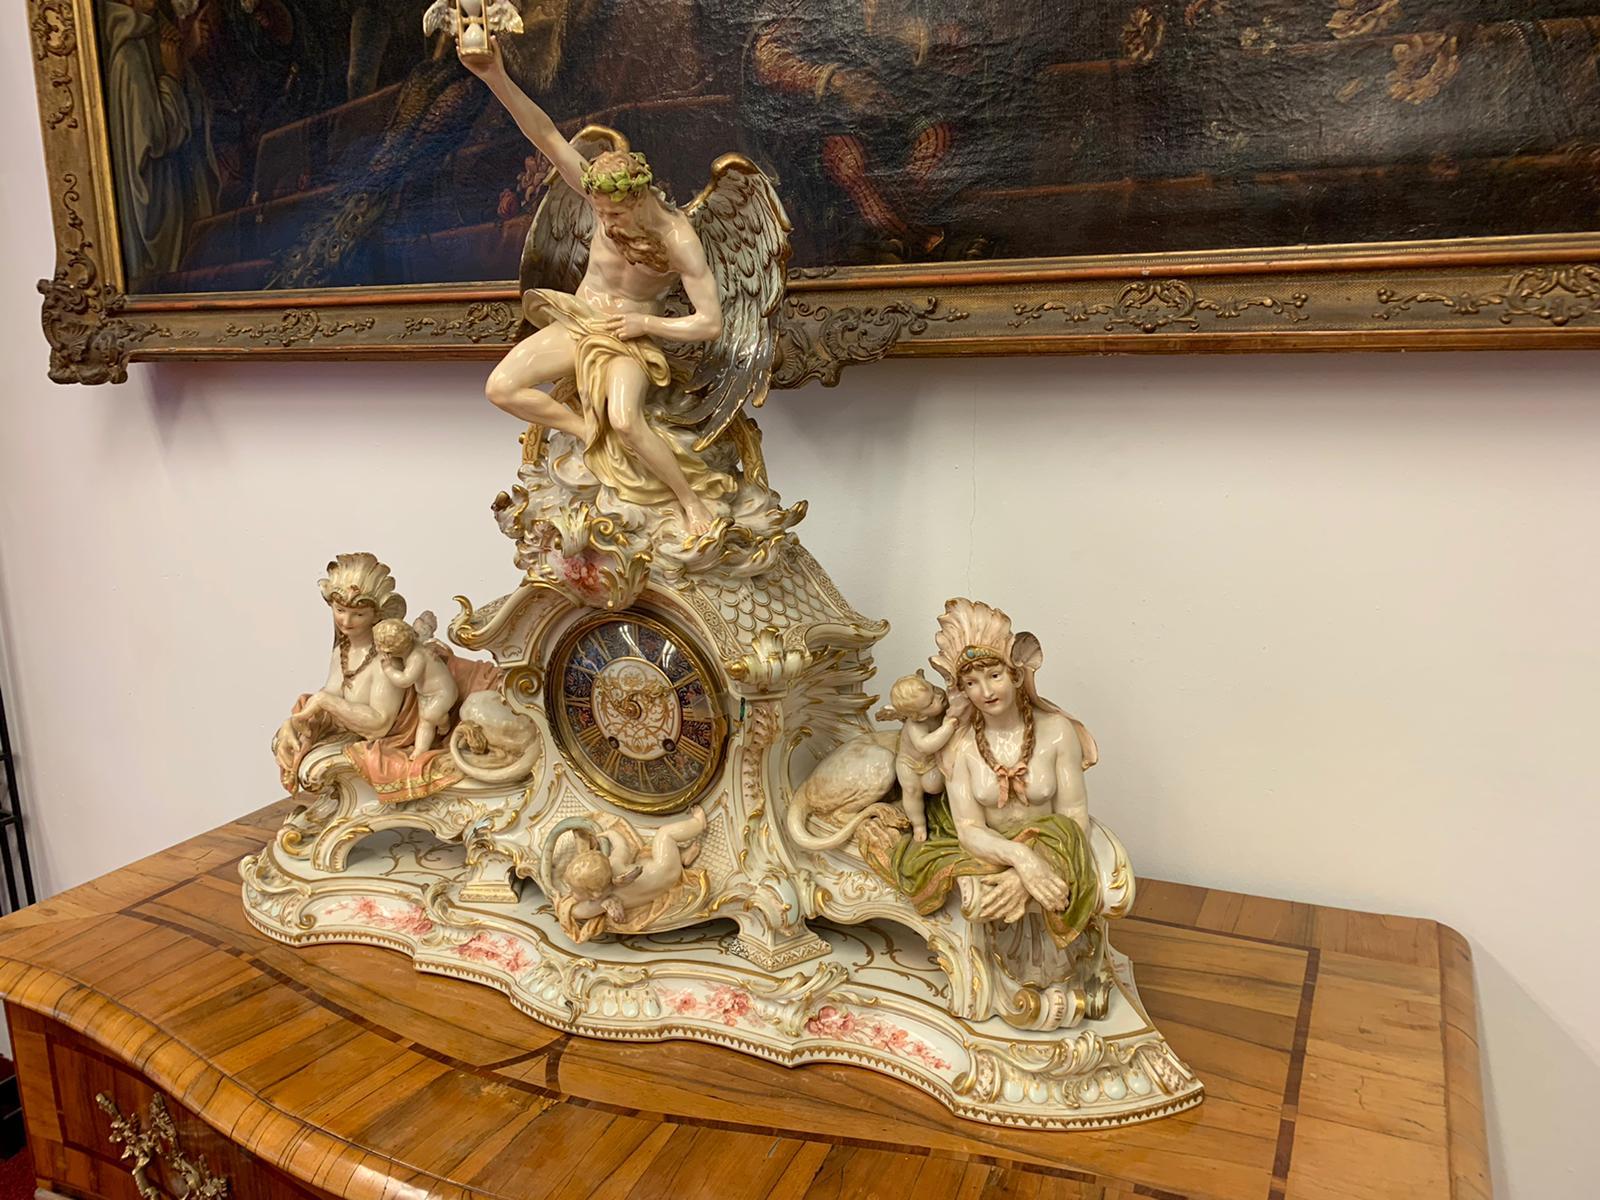 Rococo Porcelain Fireplace-Mantel Clock with Two Sphinxes and Cherubs KPM, Berlin